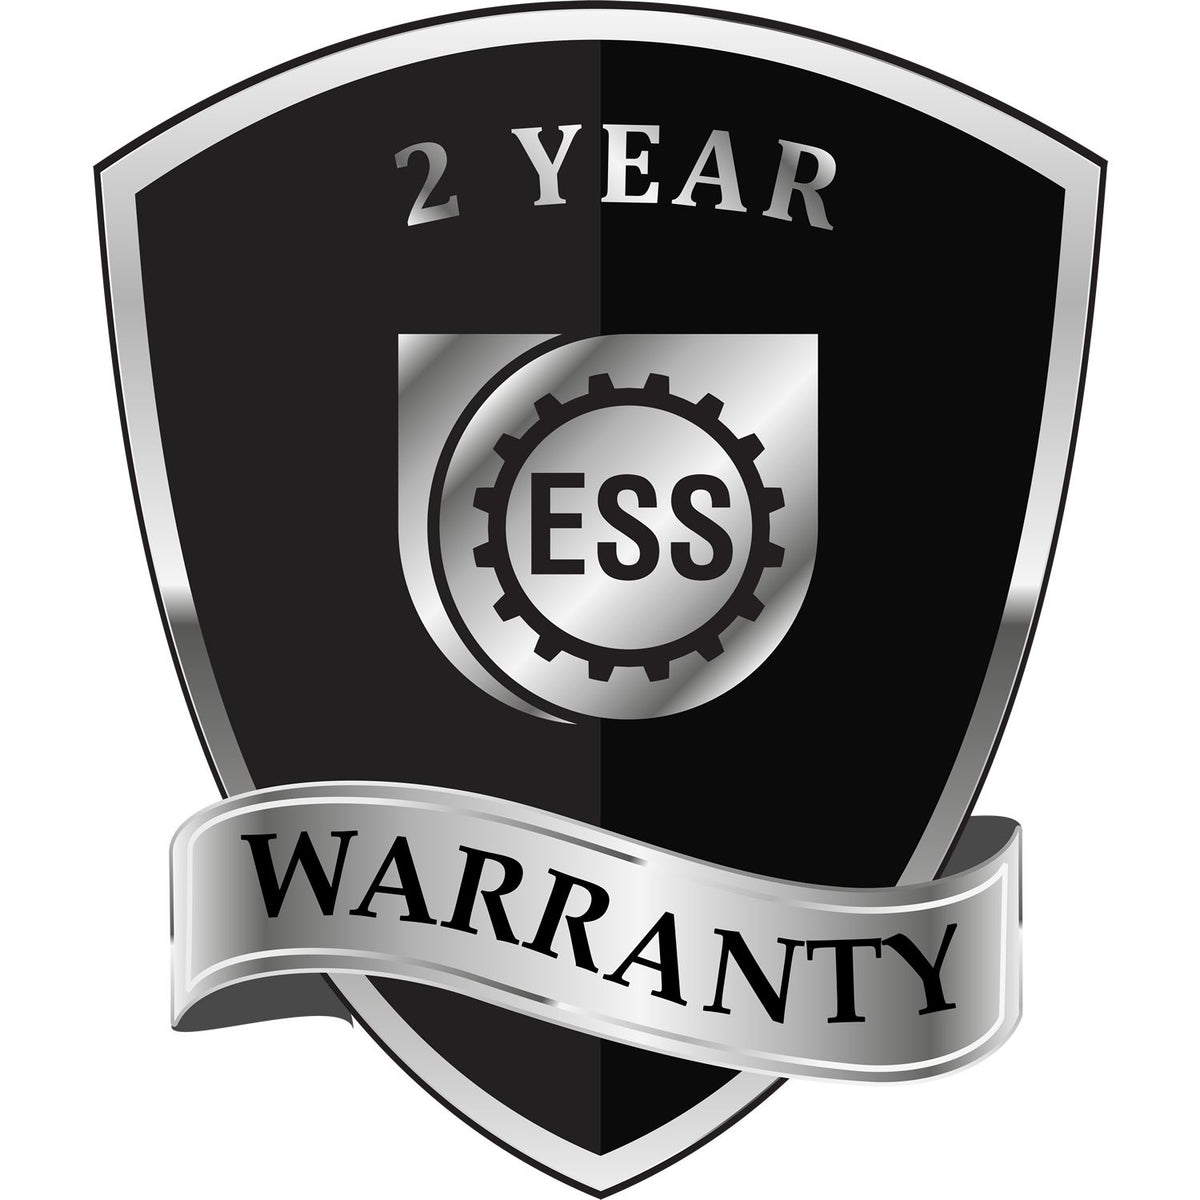 A black and silver badge or emblem showing warranty information for the Gift New Hampshire Land Surveyor Seal